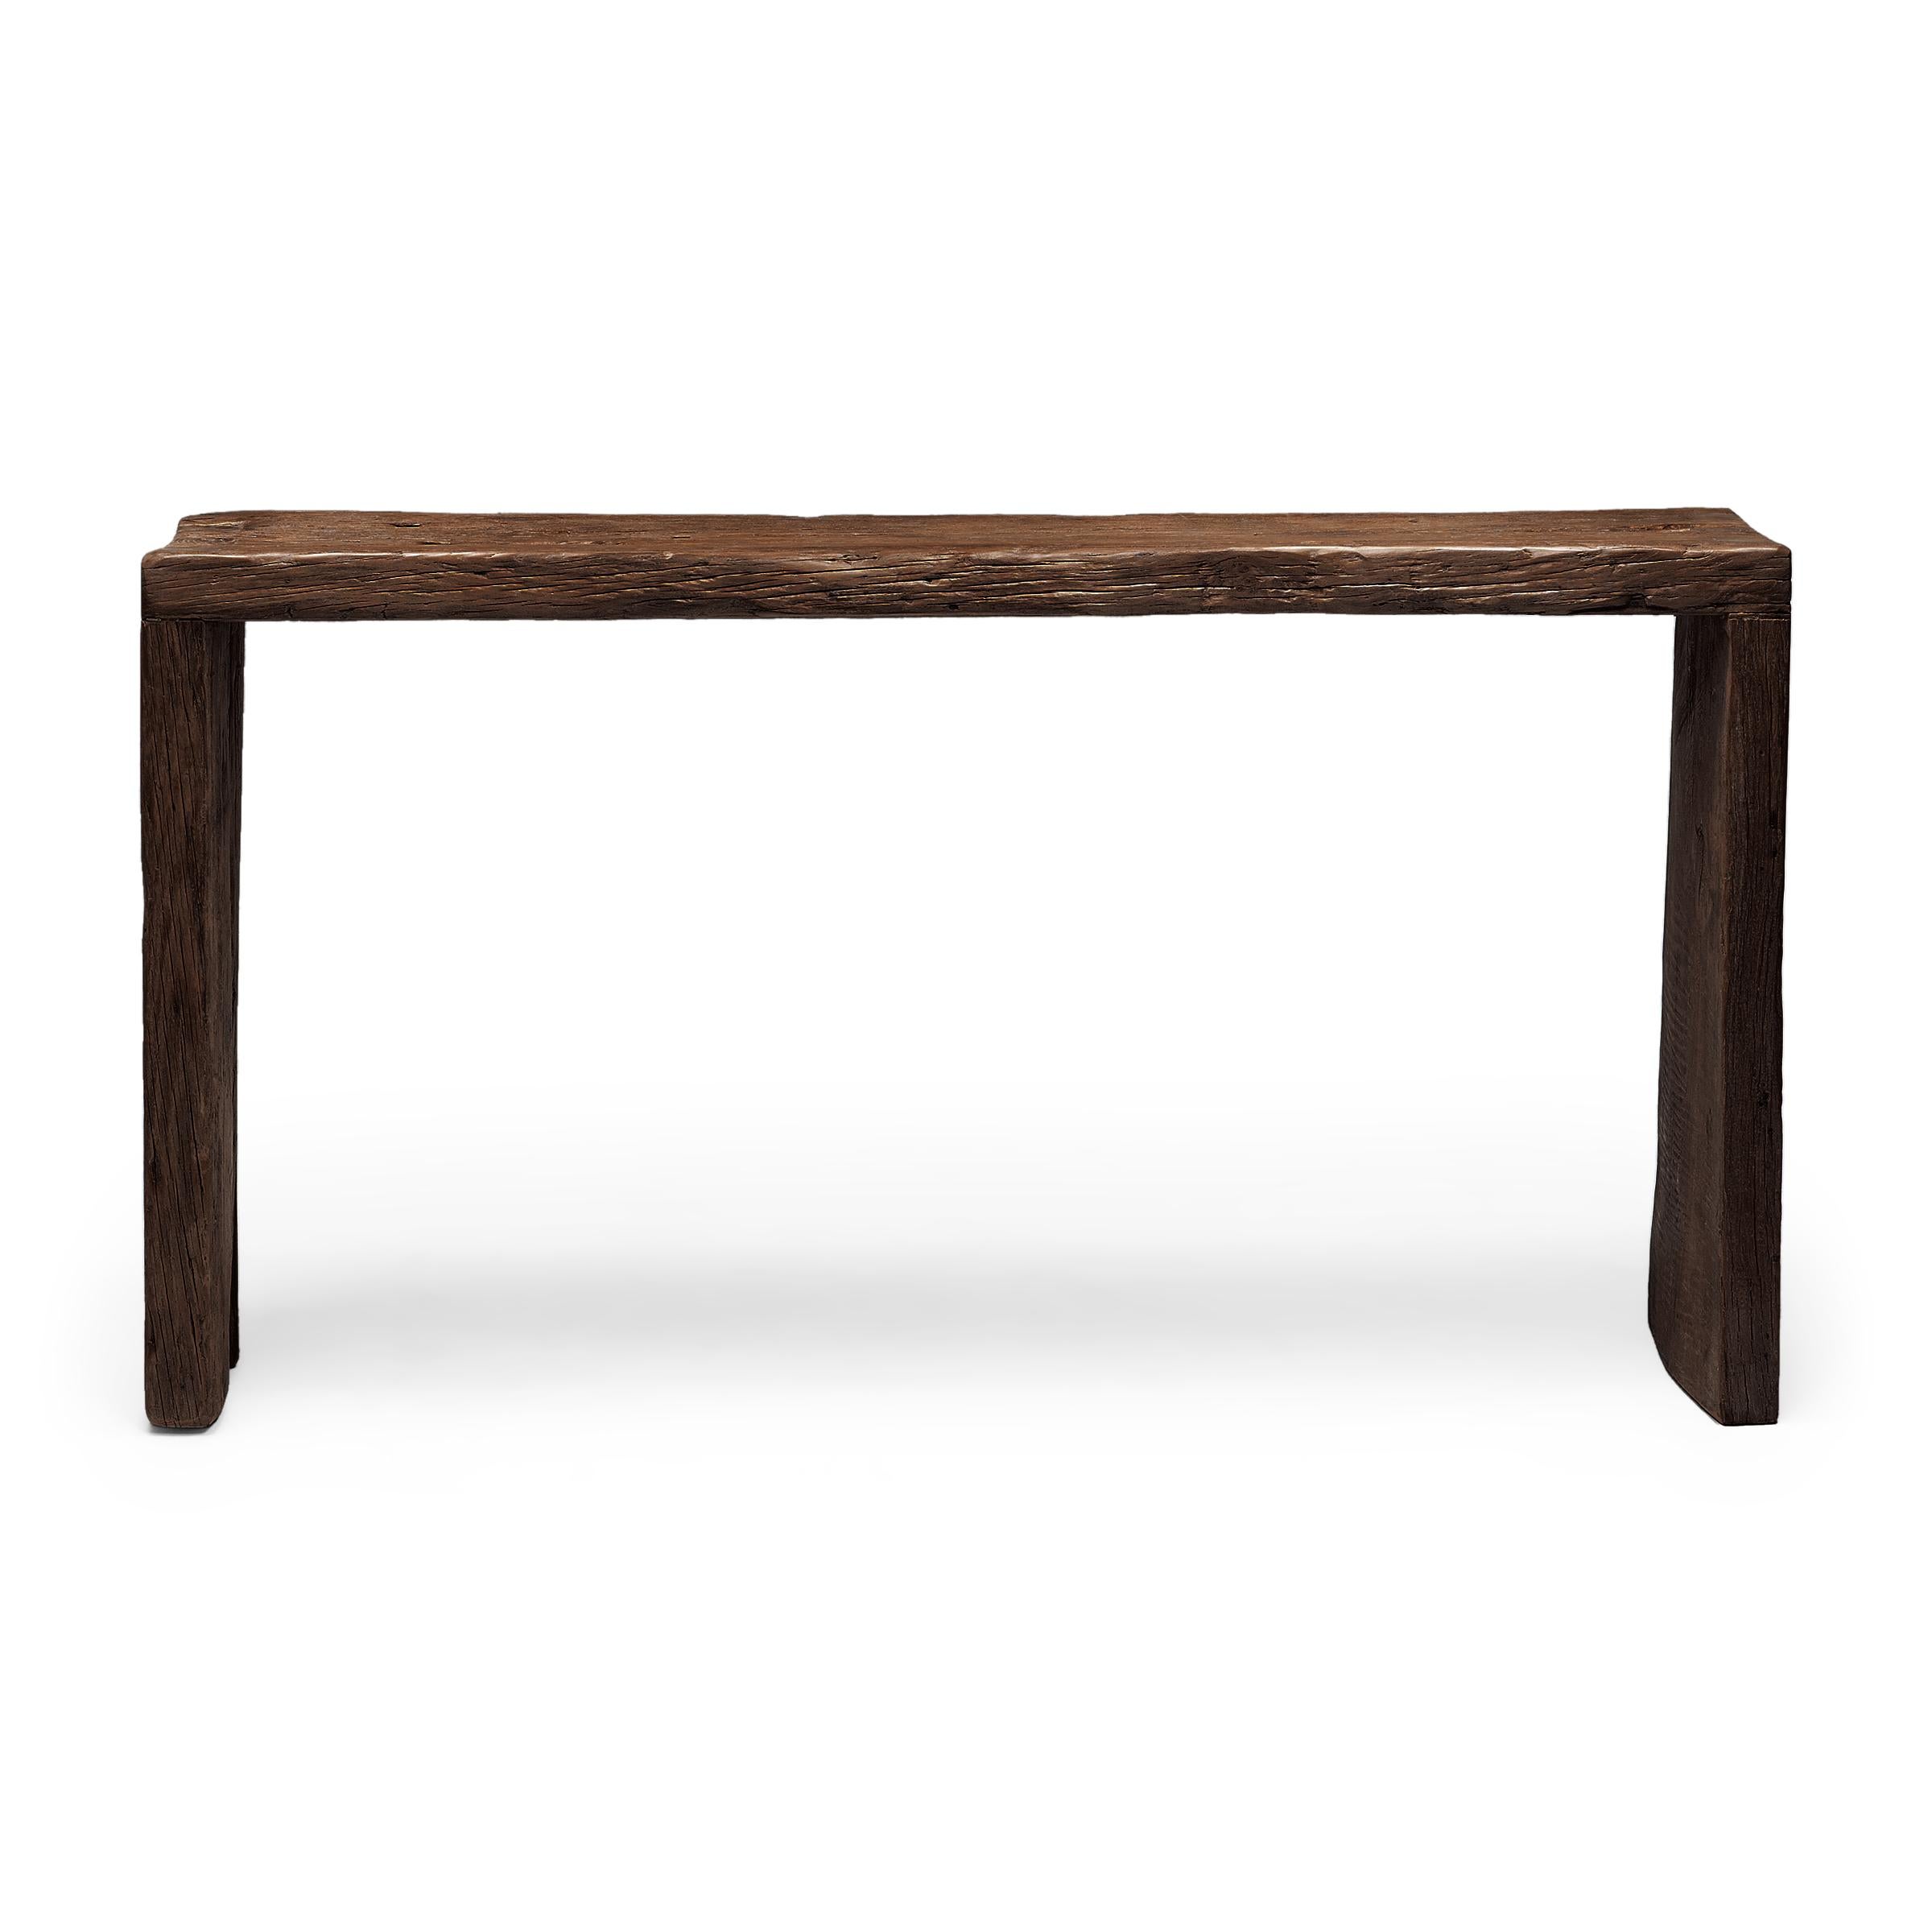 Our custom reclaimed wood console tables are hand-crafted by local artisans using architectural salvage from Qing-dynasty buildings. Each table is expertly crafted to a minimalist, waterfall design with traditional dovetailed joinery, without a